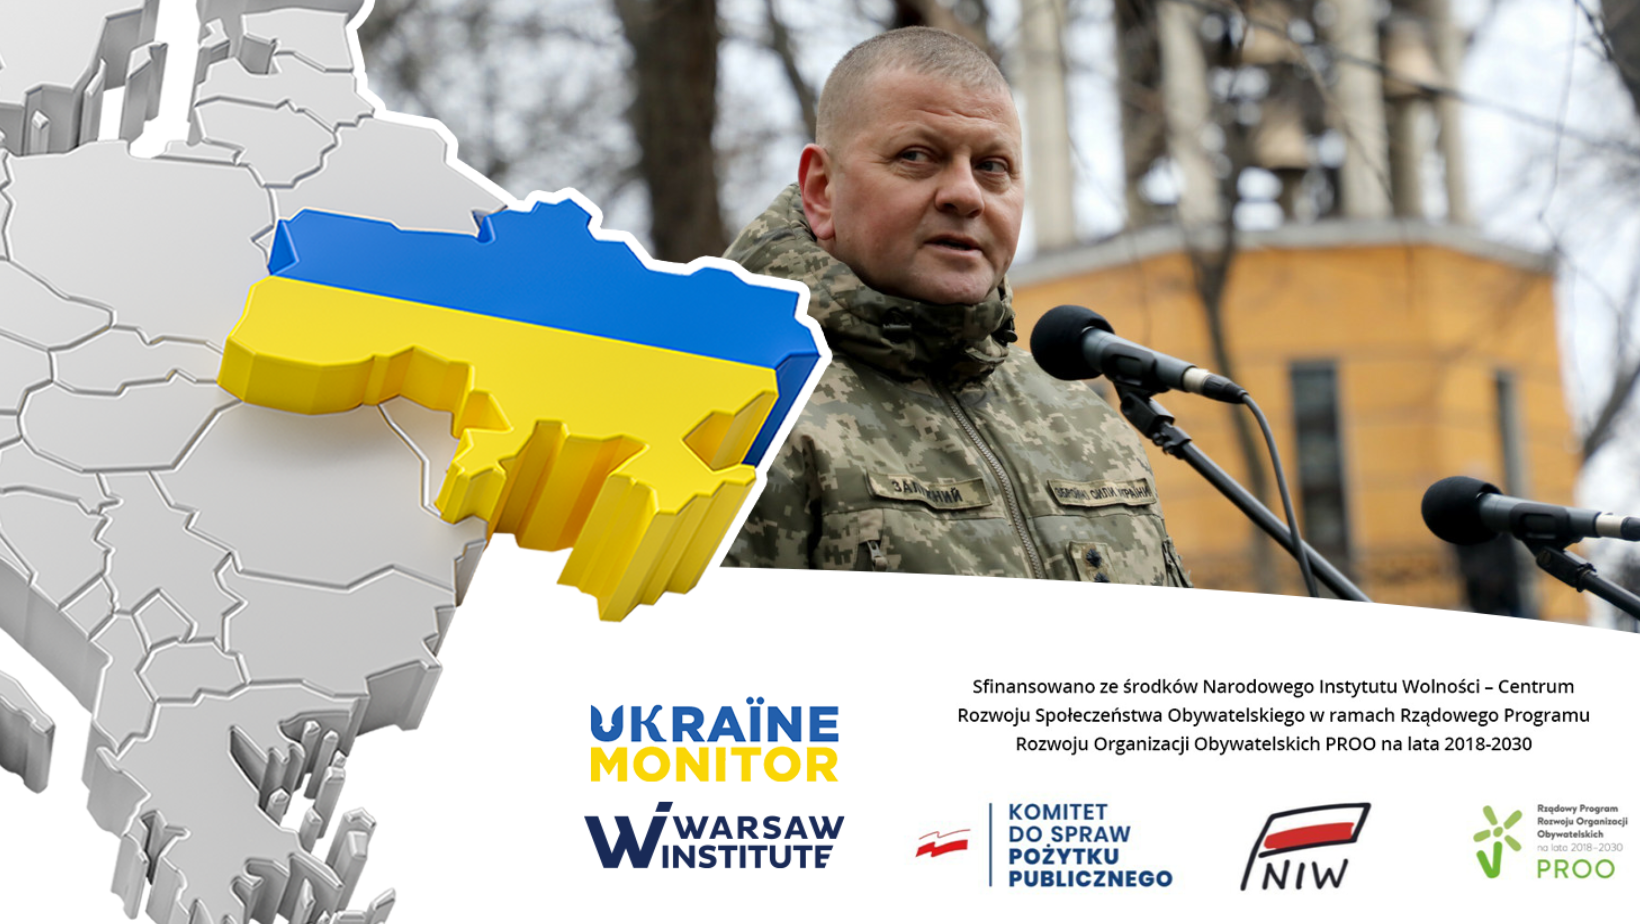 Ukraine’s Commander-In-Chief on the War with Russia in the Interview with The Economist